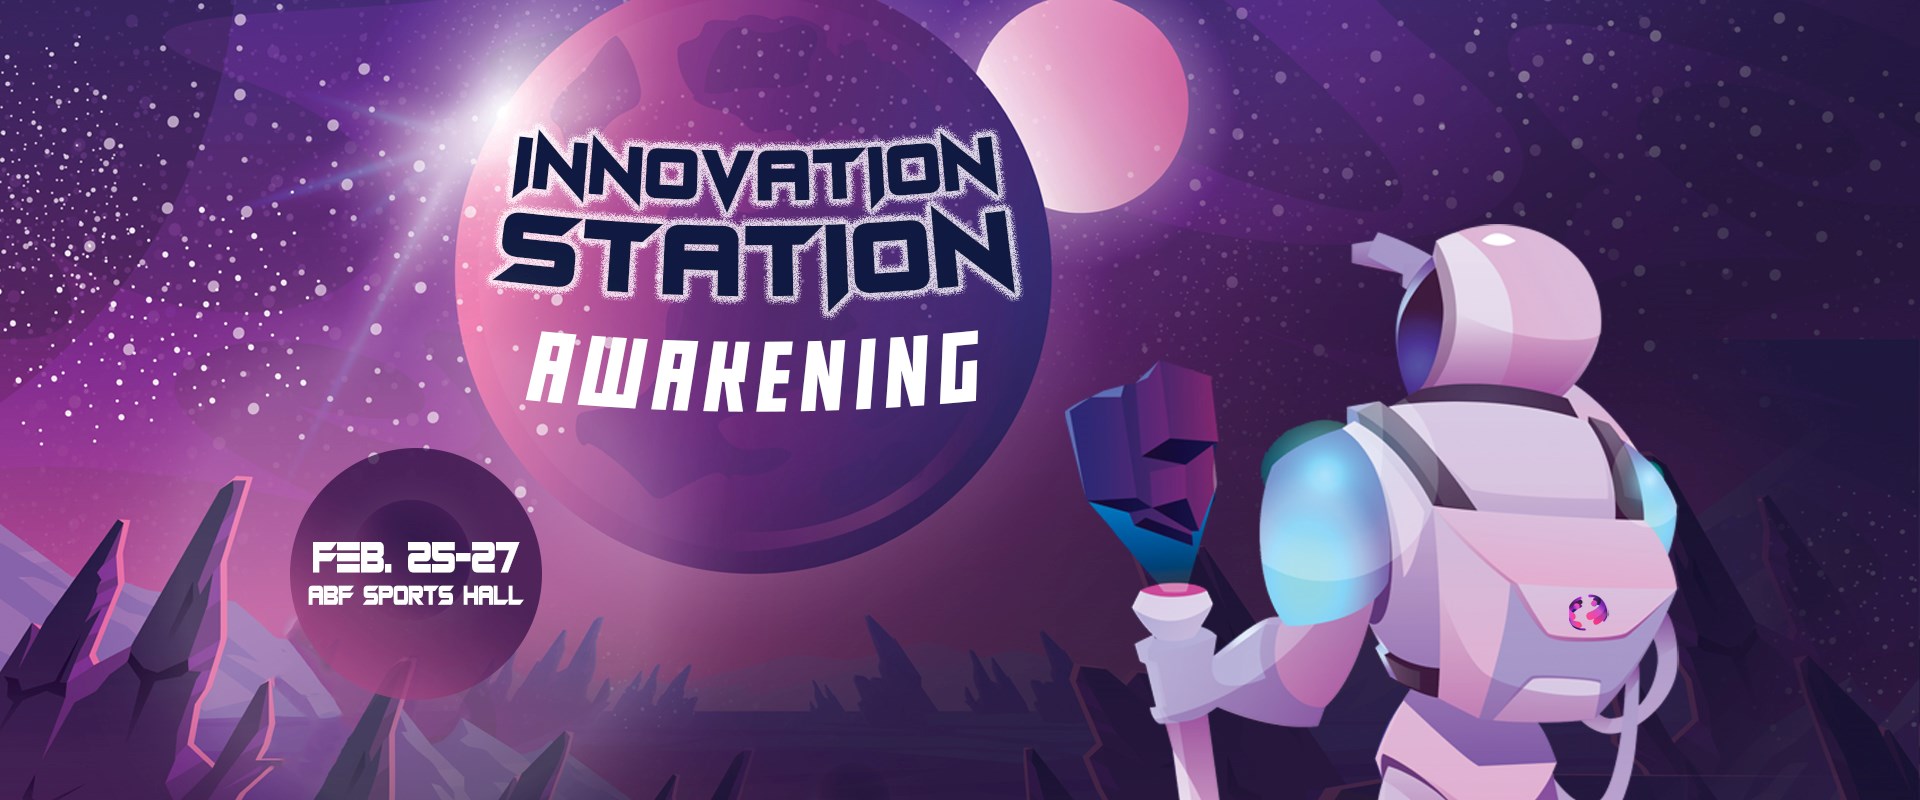 Innovation Station: Social Entrepreneurship Competition Brings Leading NGO Experts on Campus